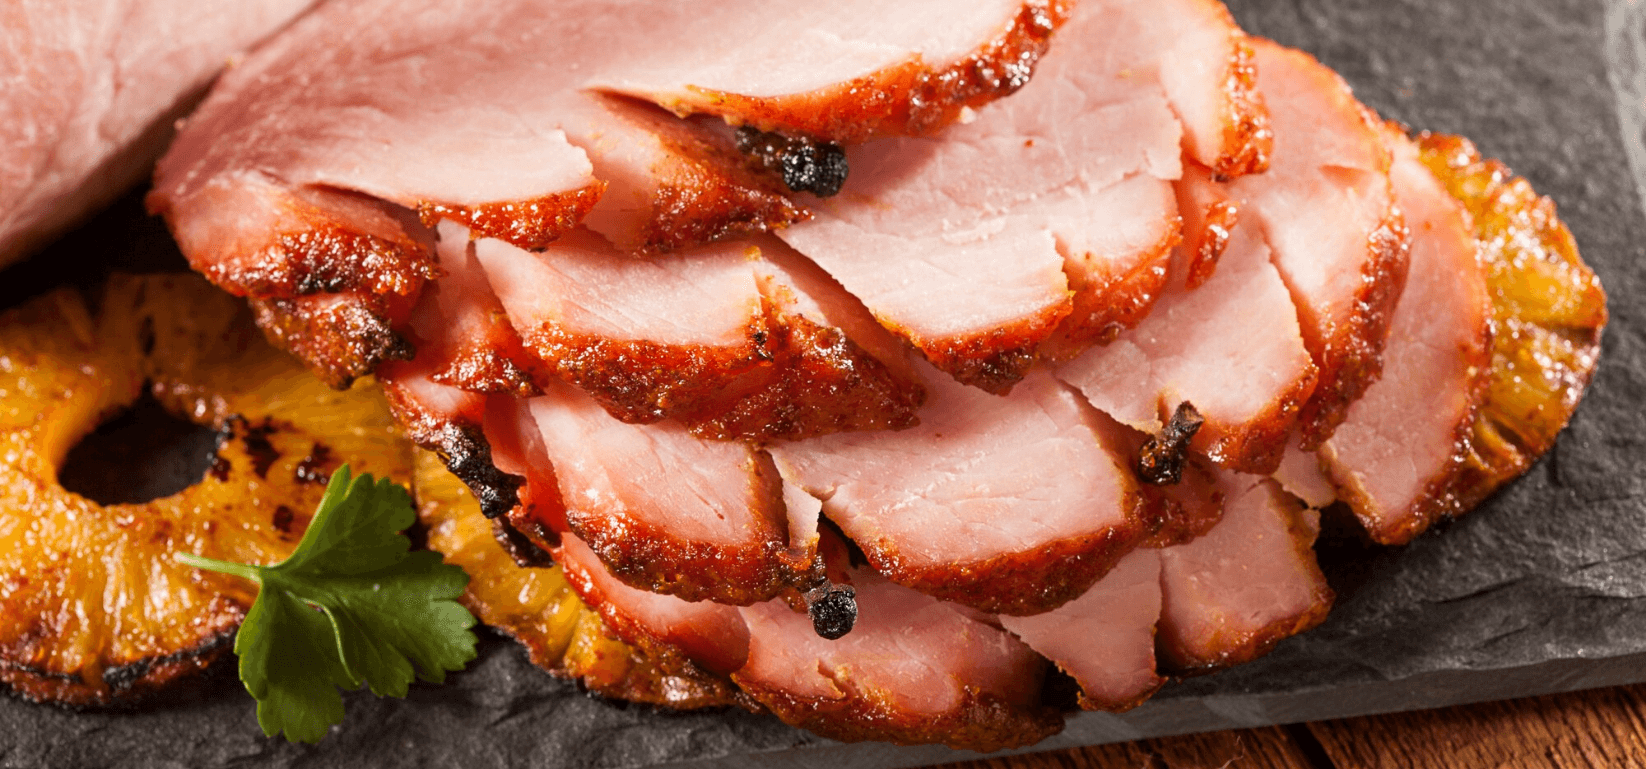 Traditional ham with cloves and pineapple